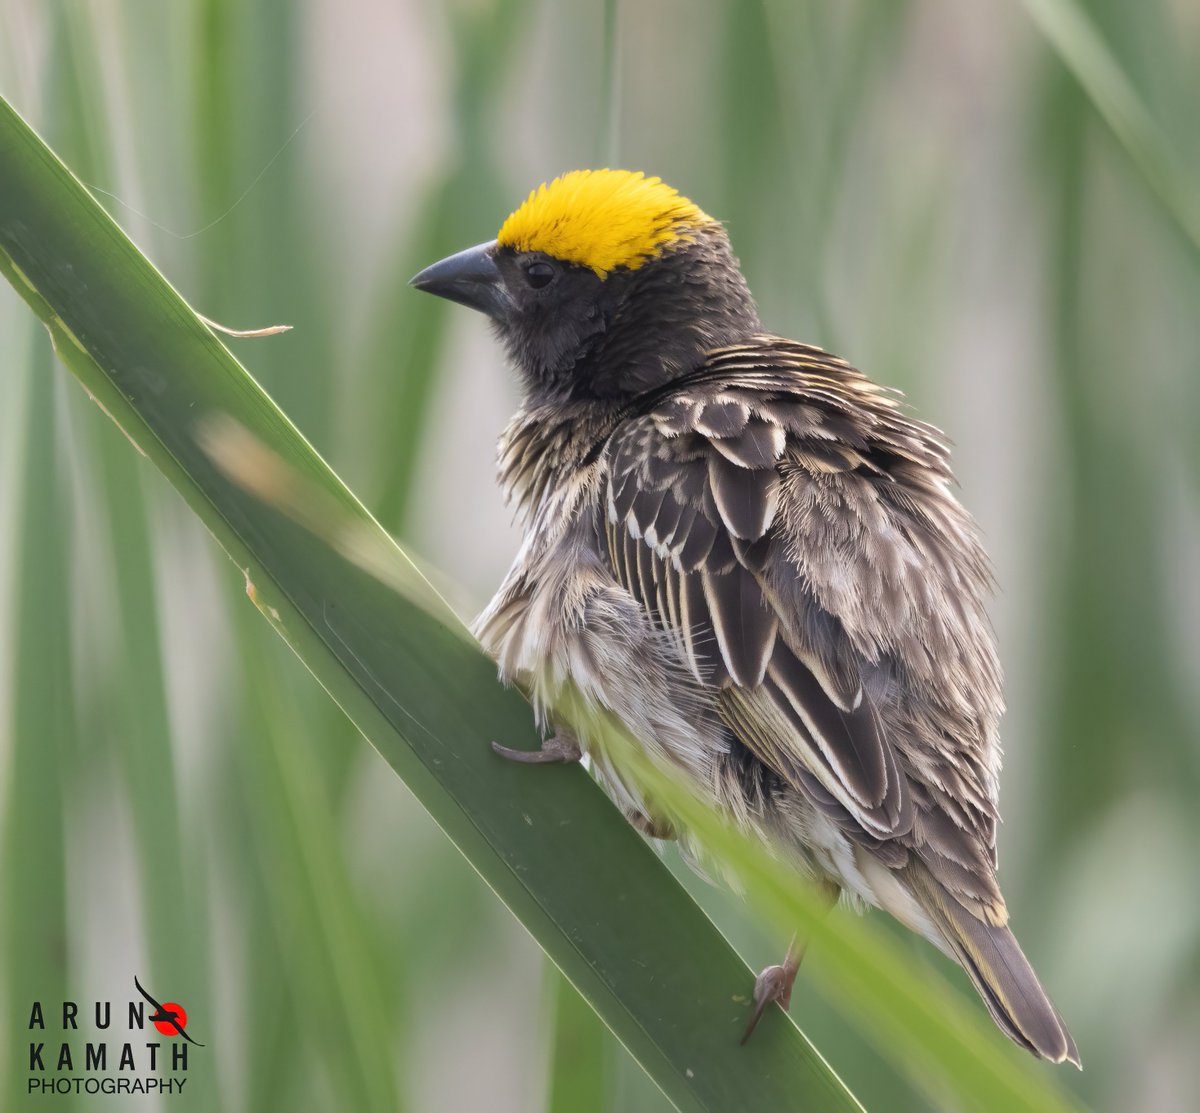 The summer is here and the weavers are also active. Here is a streaked weaver feom the weekend #birding among the reeds. They make the nest inside reeds unlike baya nest. #indiaves #TwitterNaturePhotography #birds